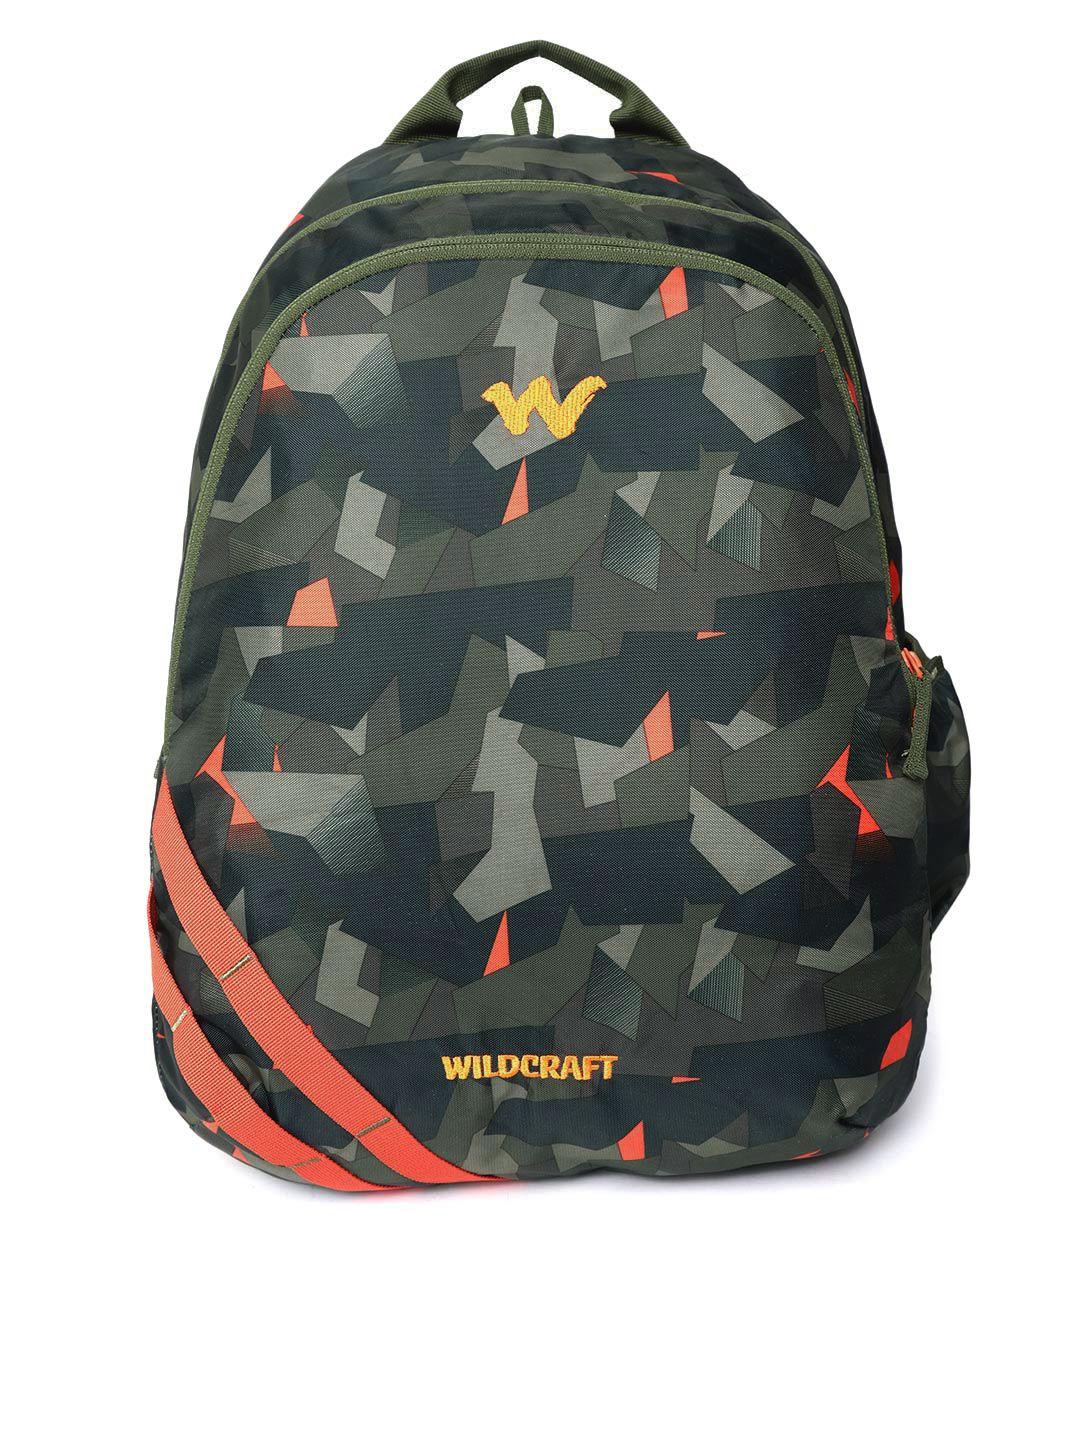 wildcraft unisex olive green camouflage print backpack